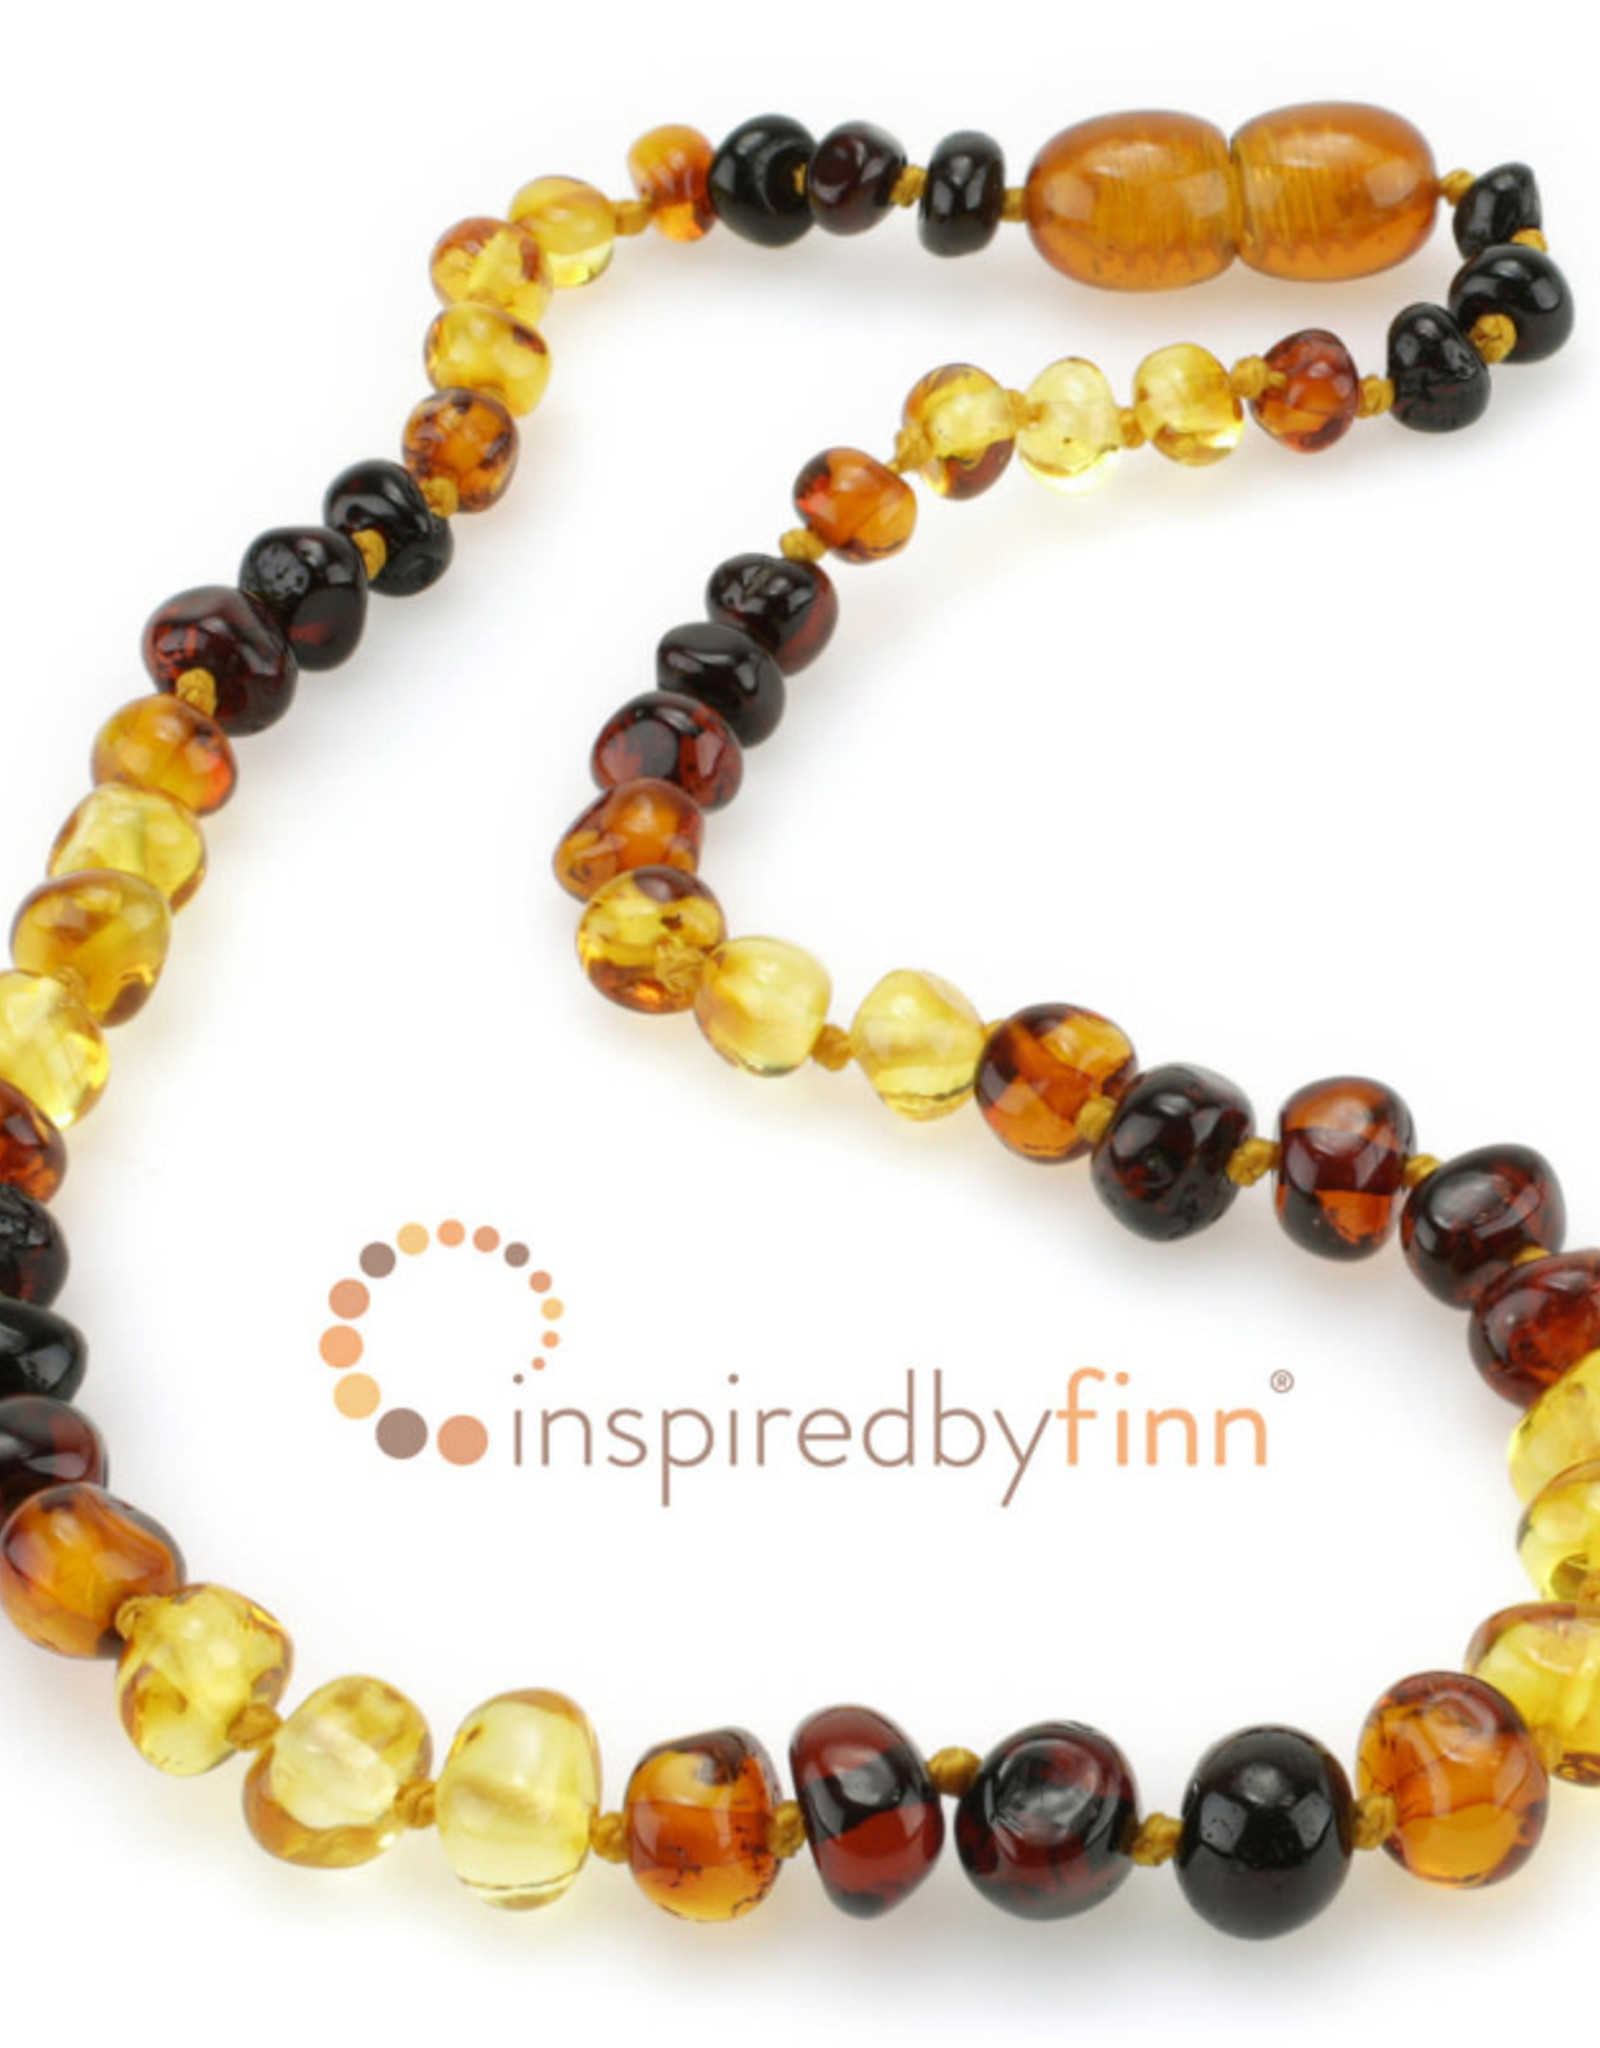 Inspired by Finn Baltic Amber Neckalaces Necklace Polished Rainbow Size 2:11.5-12.5"